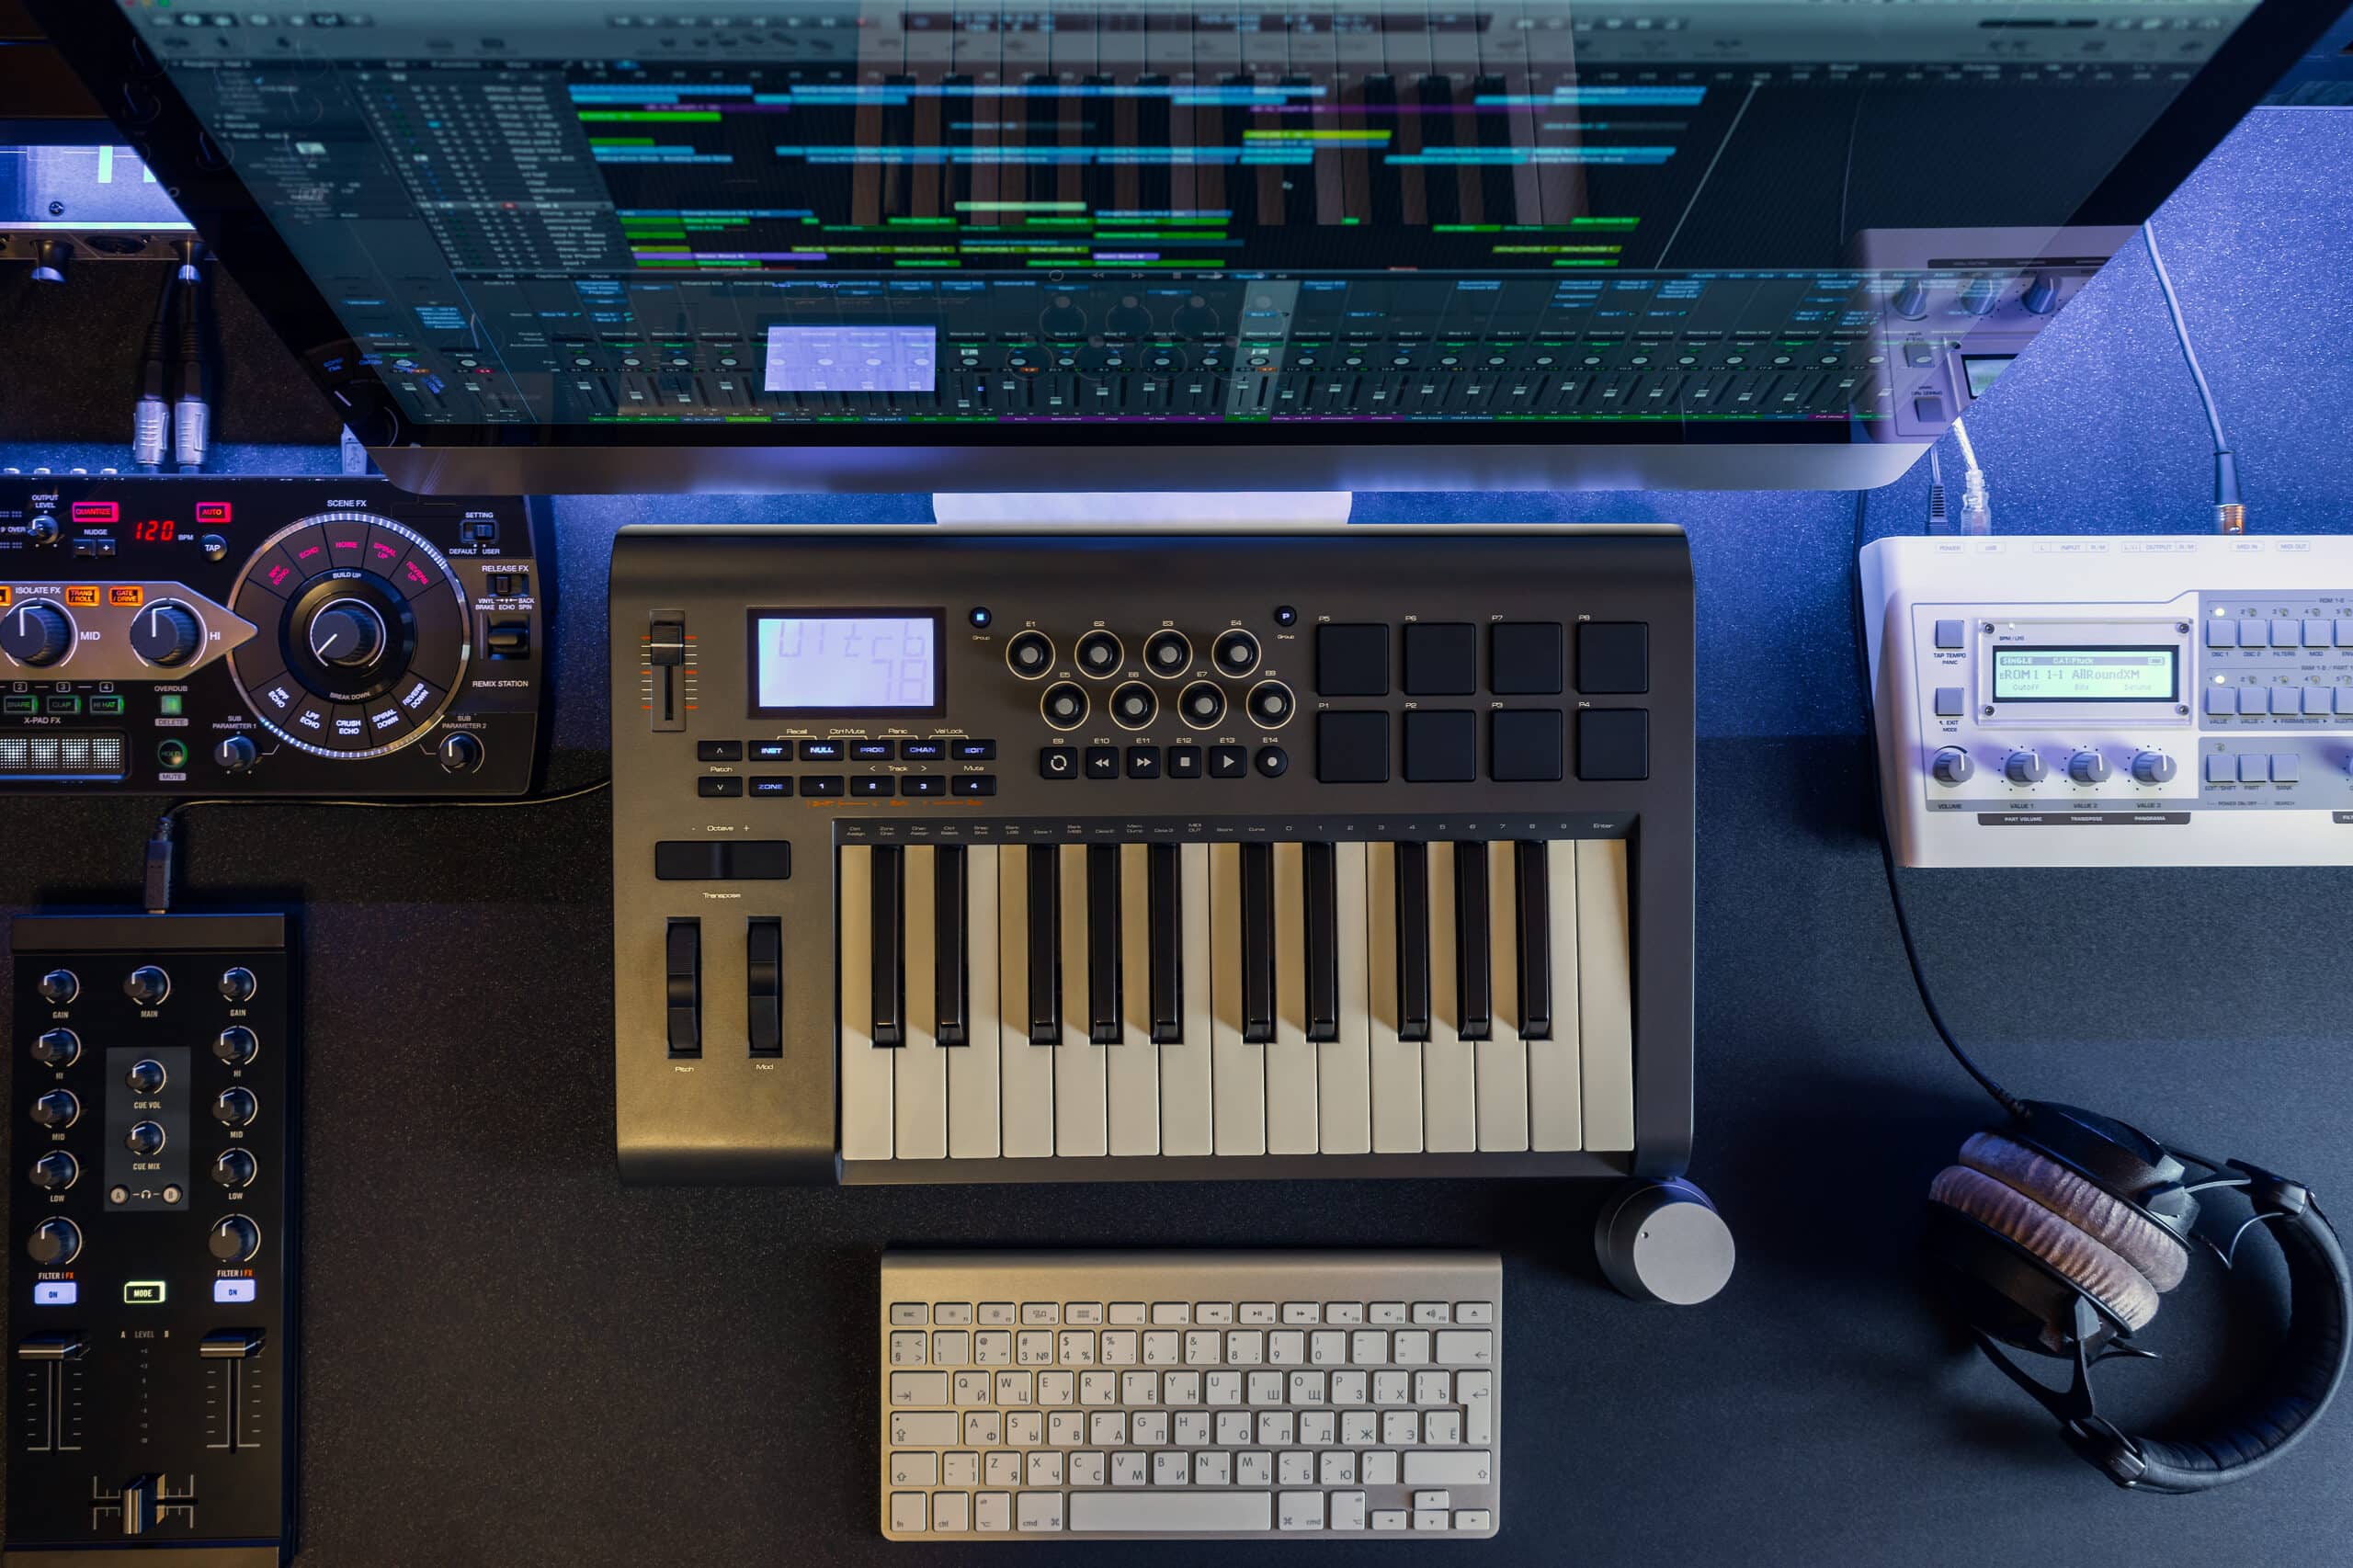 Overhead view of a music studio set up including keyboard, headphones and computer screen.